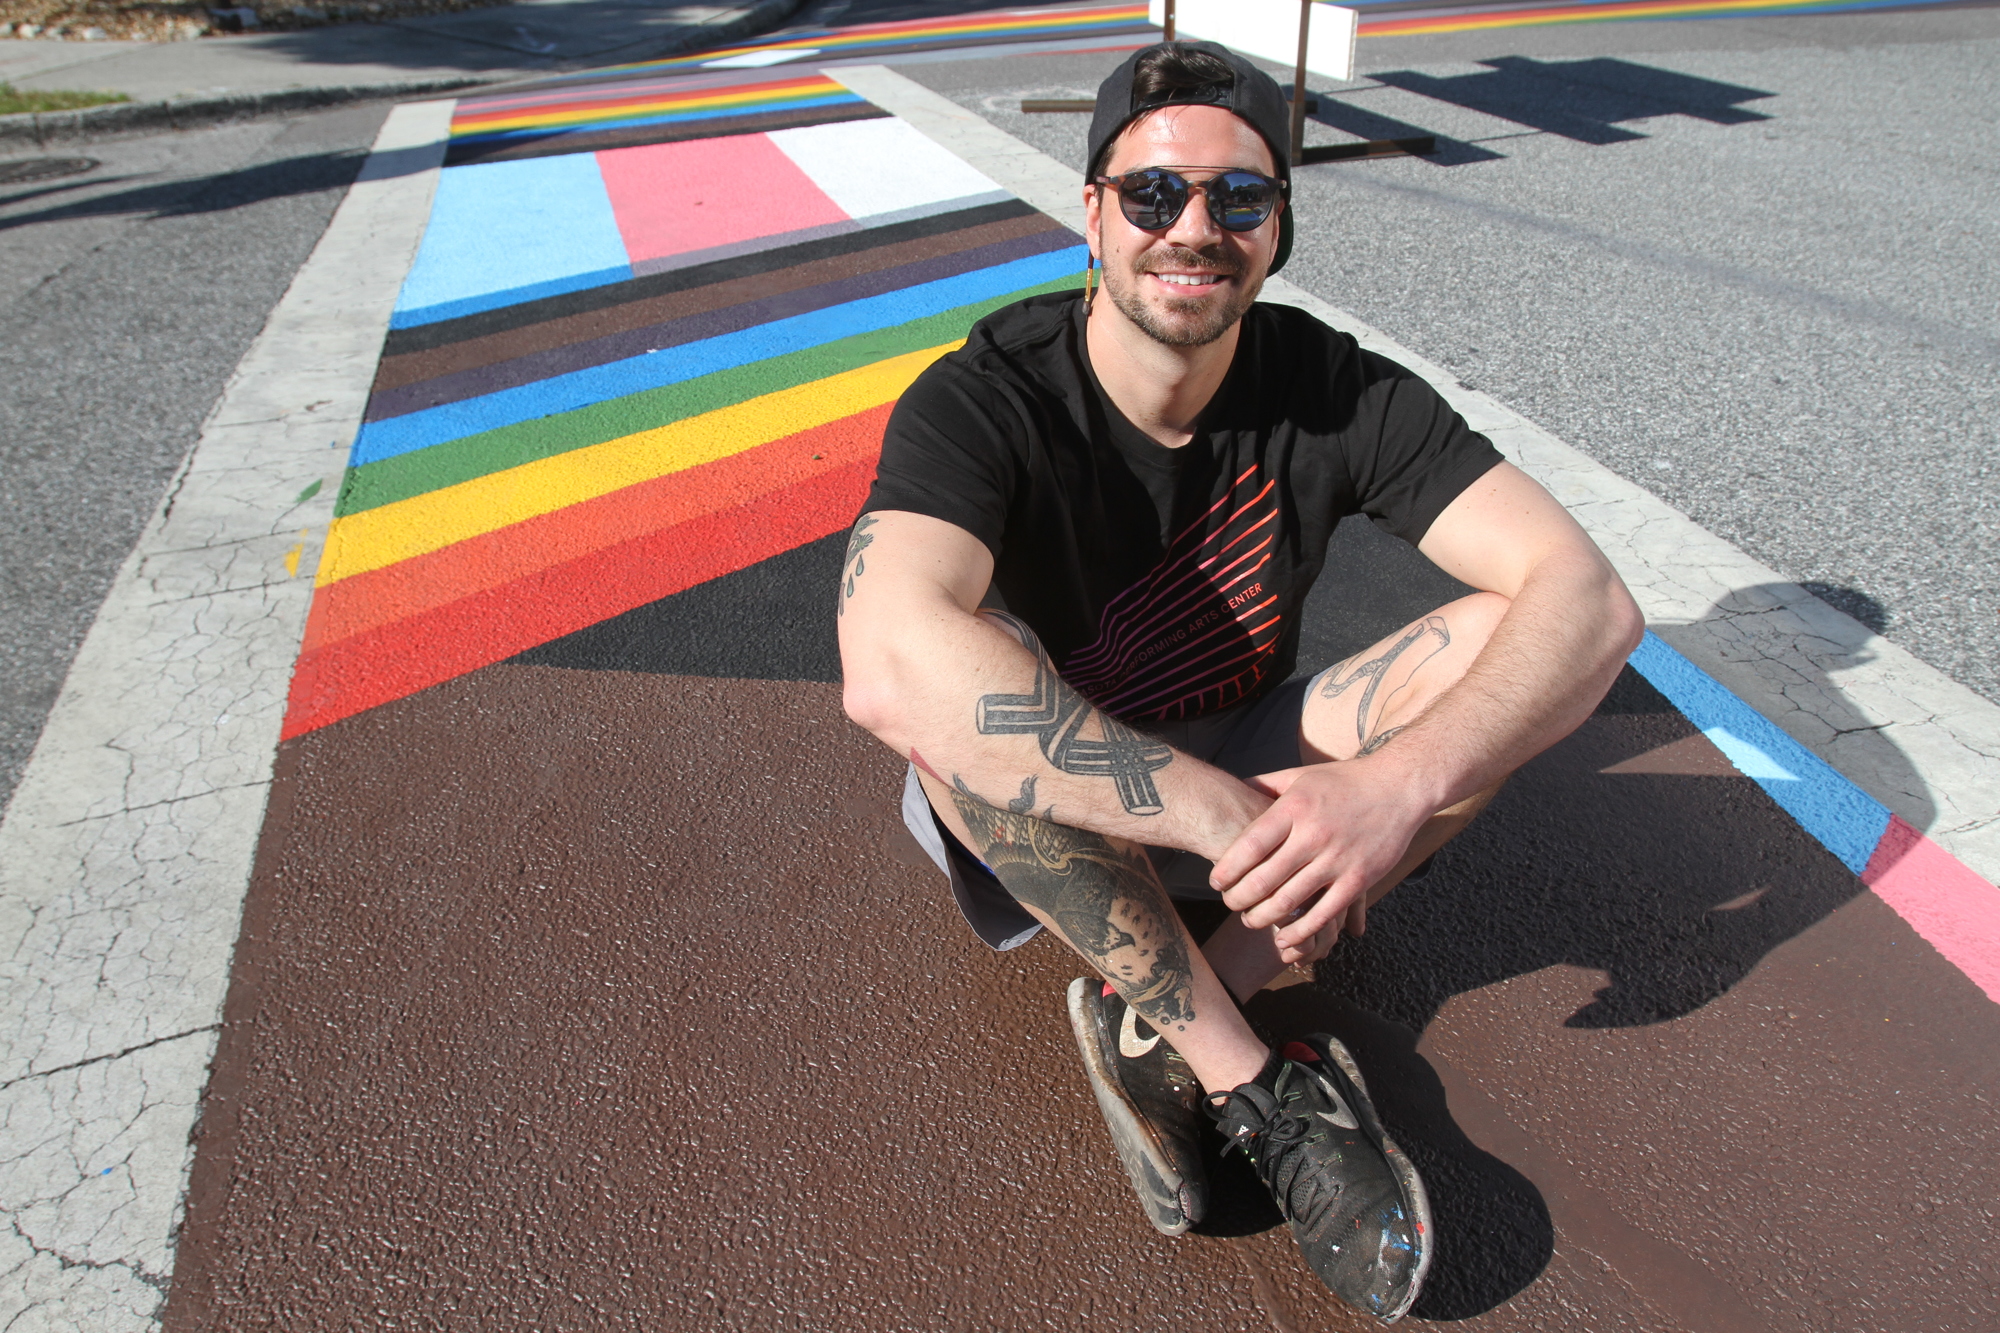 Joey Salamon worked a week with more than 20 volunteers to paint the mural.